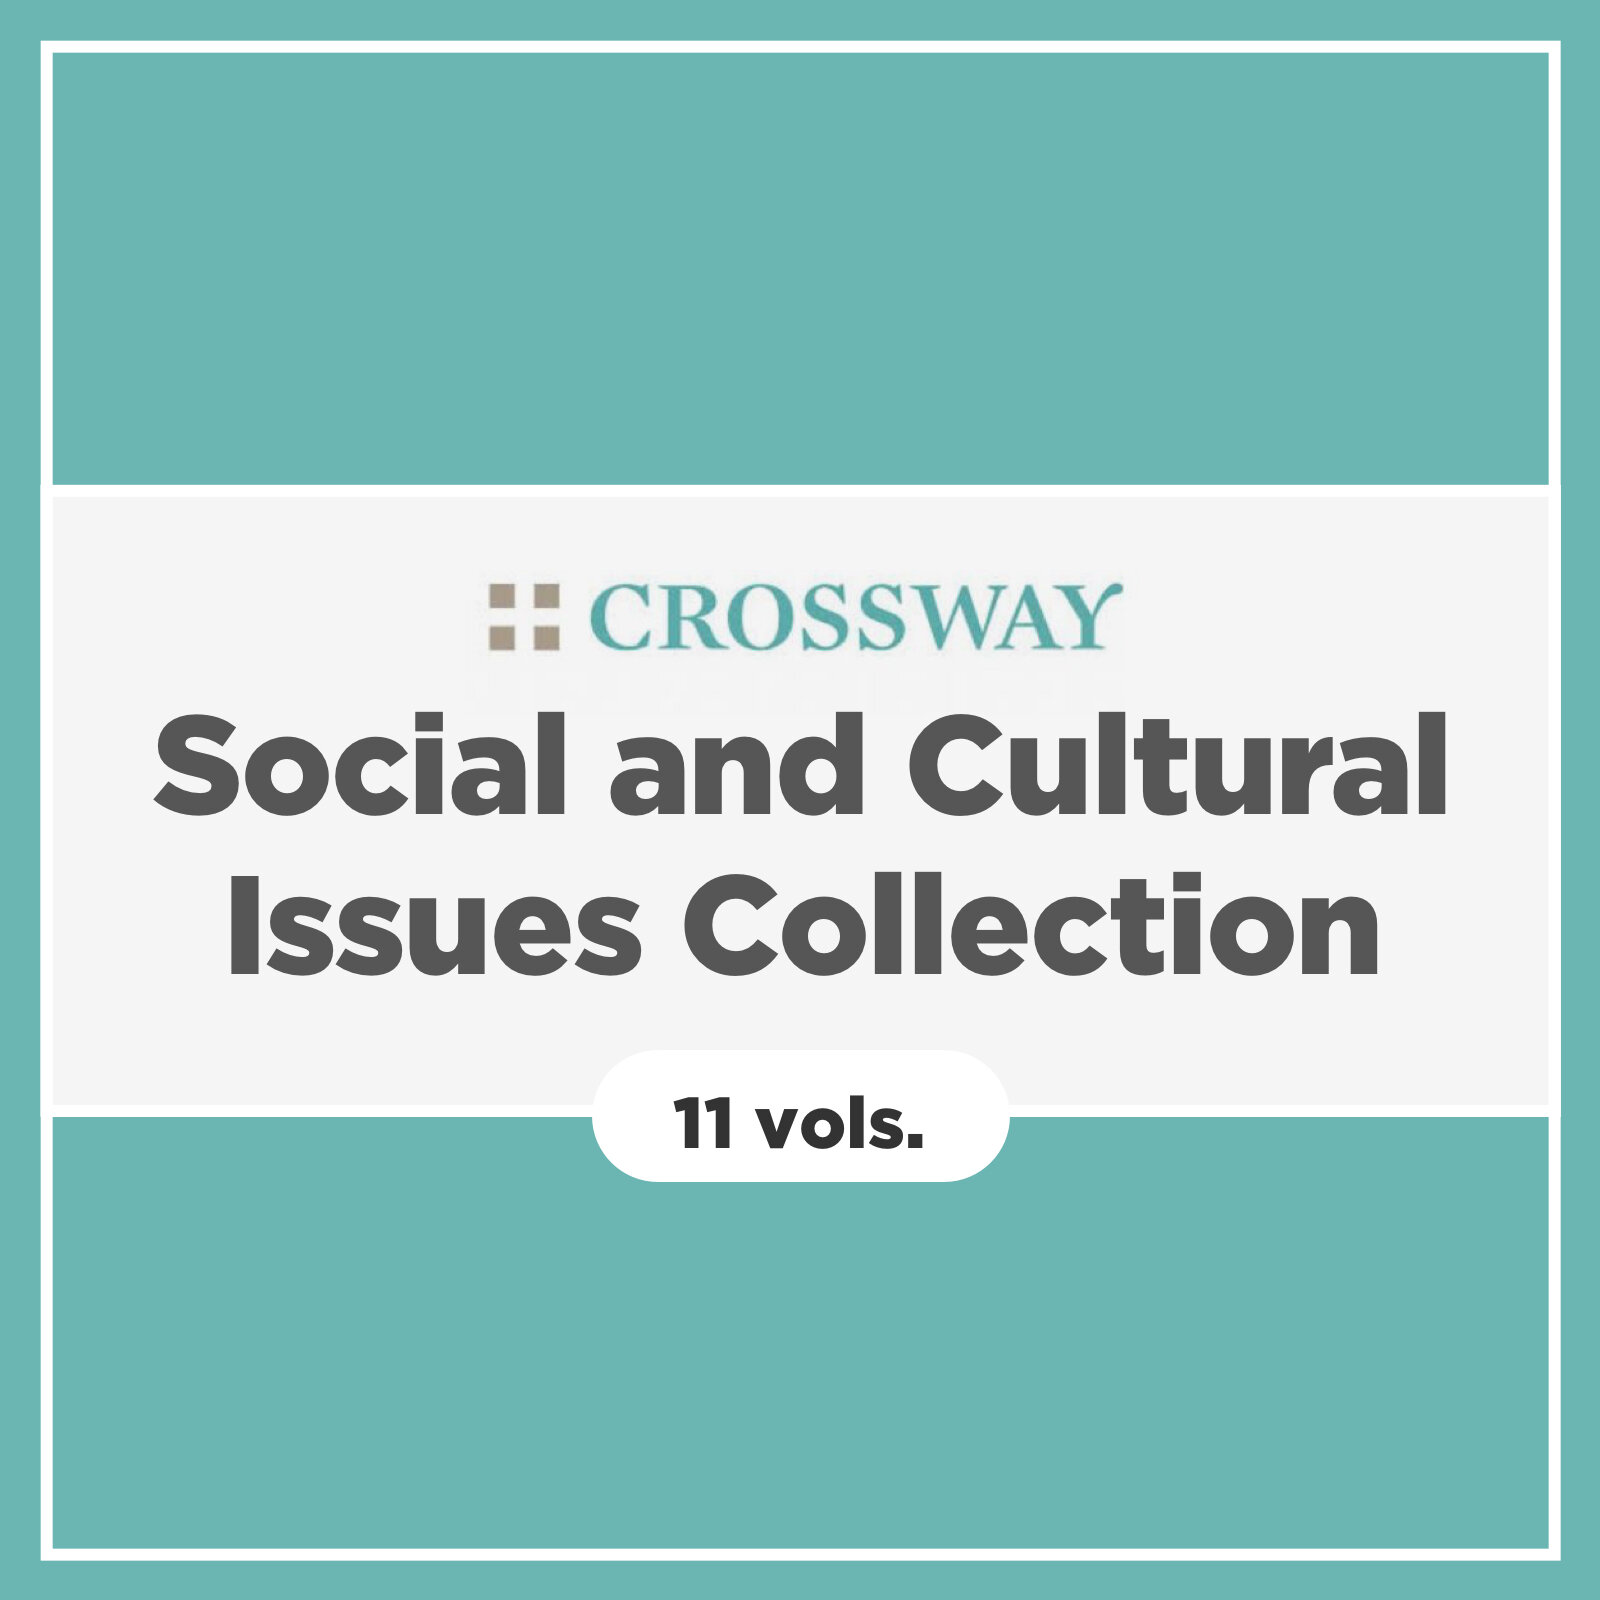 Crossway Social and Cultural Issues Collection (11 vols.)